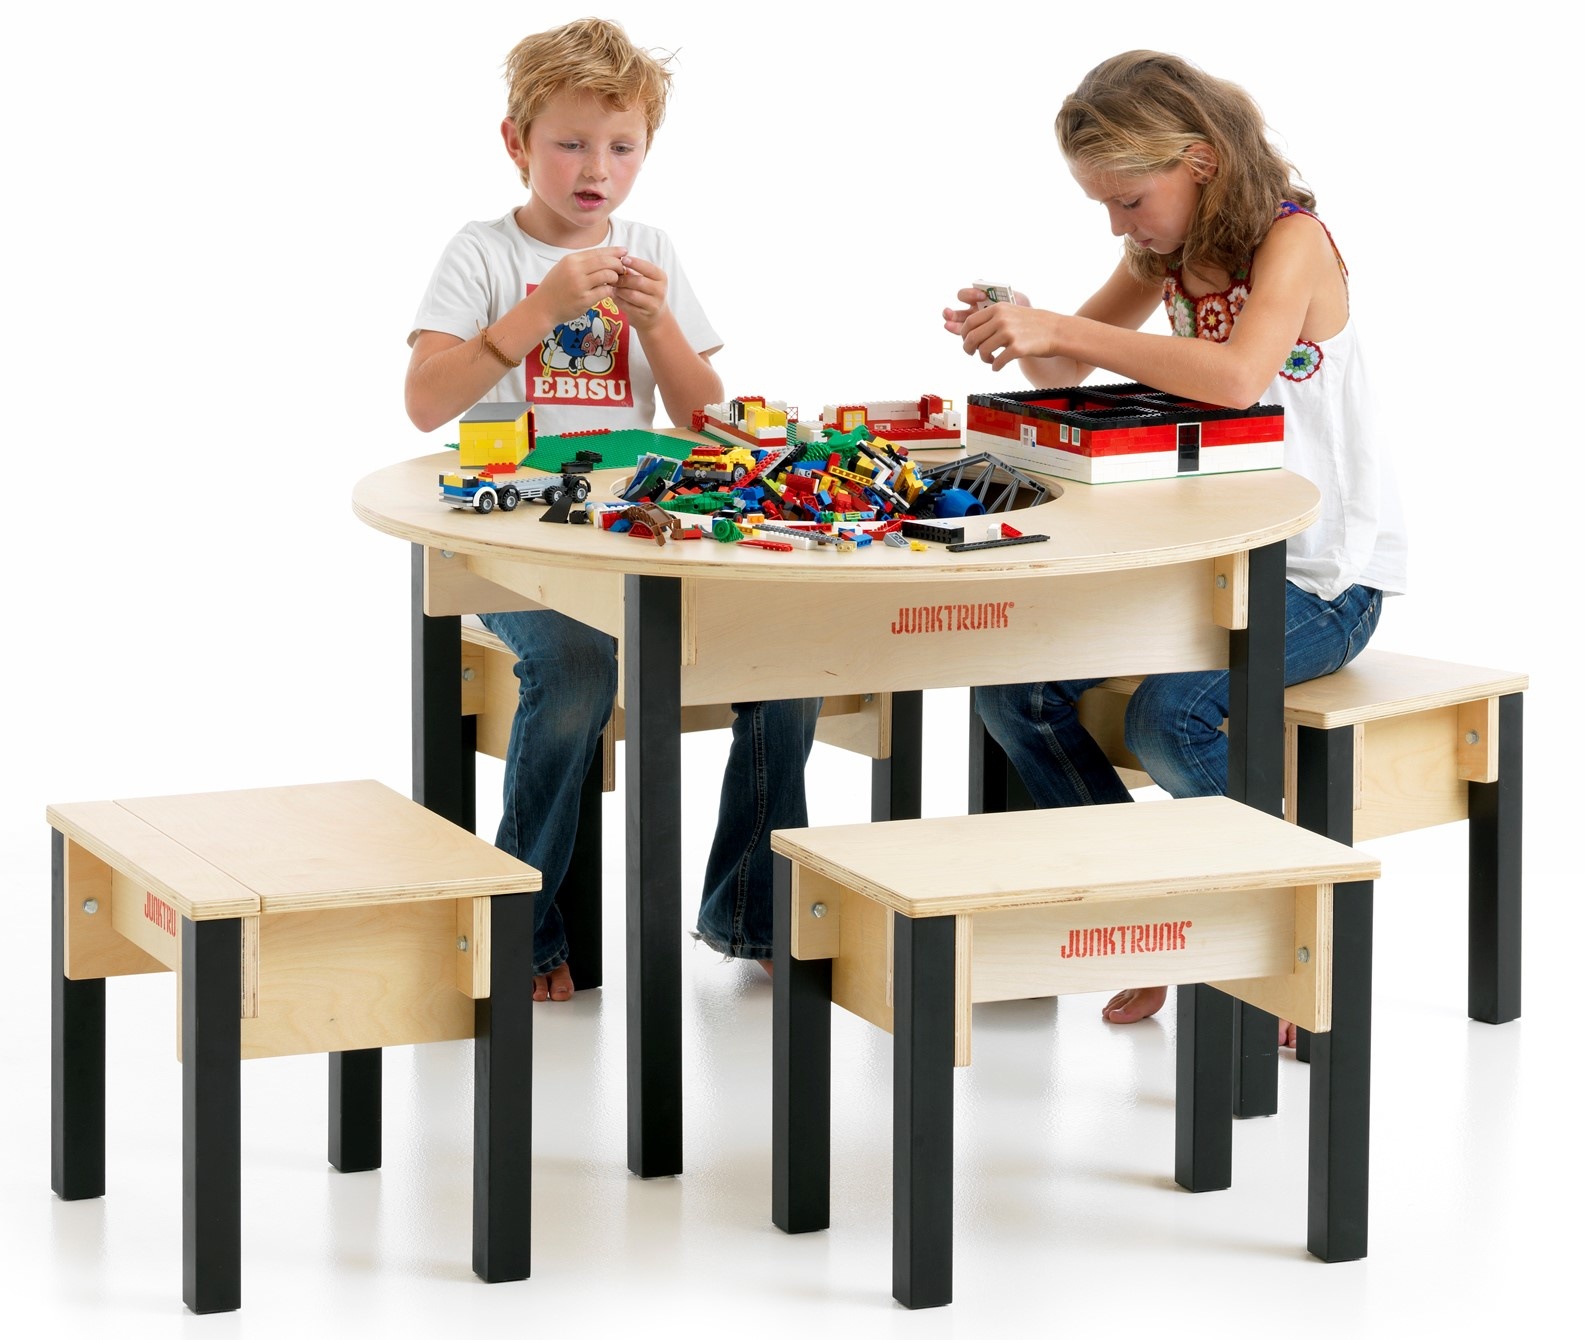 Round Lego Table with storage brick container and 4 chairs